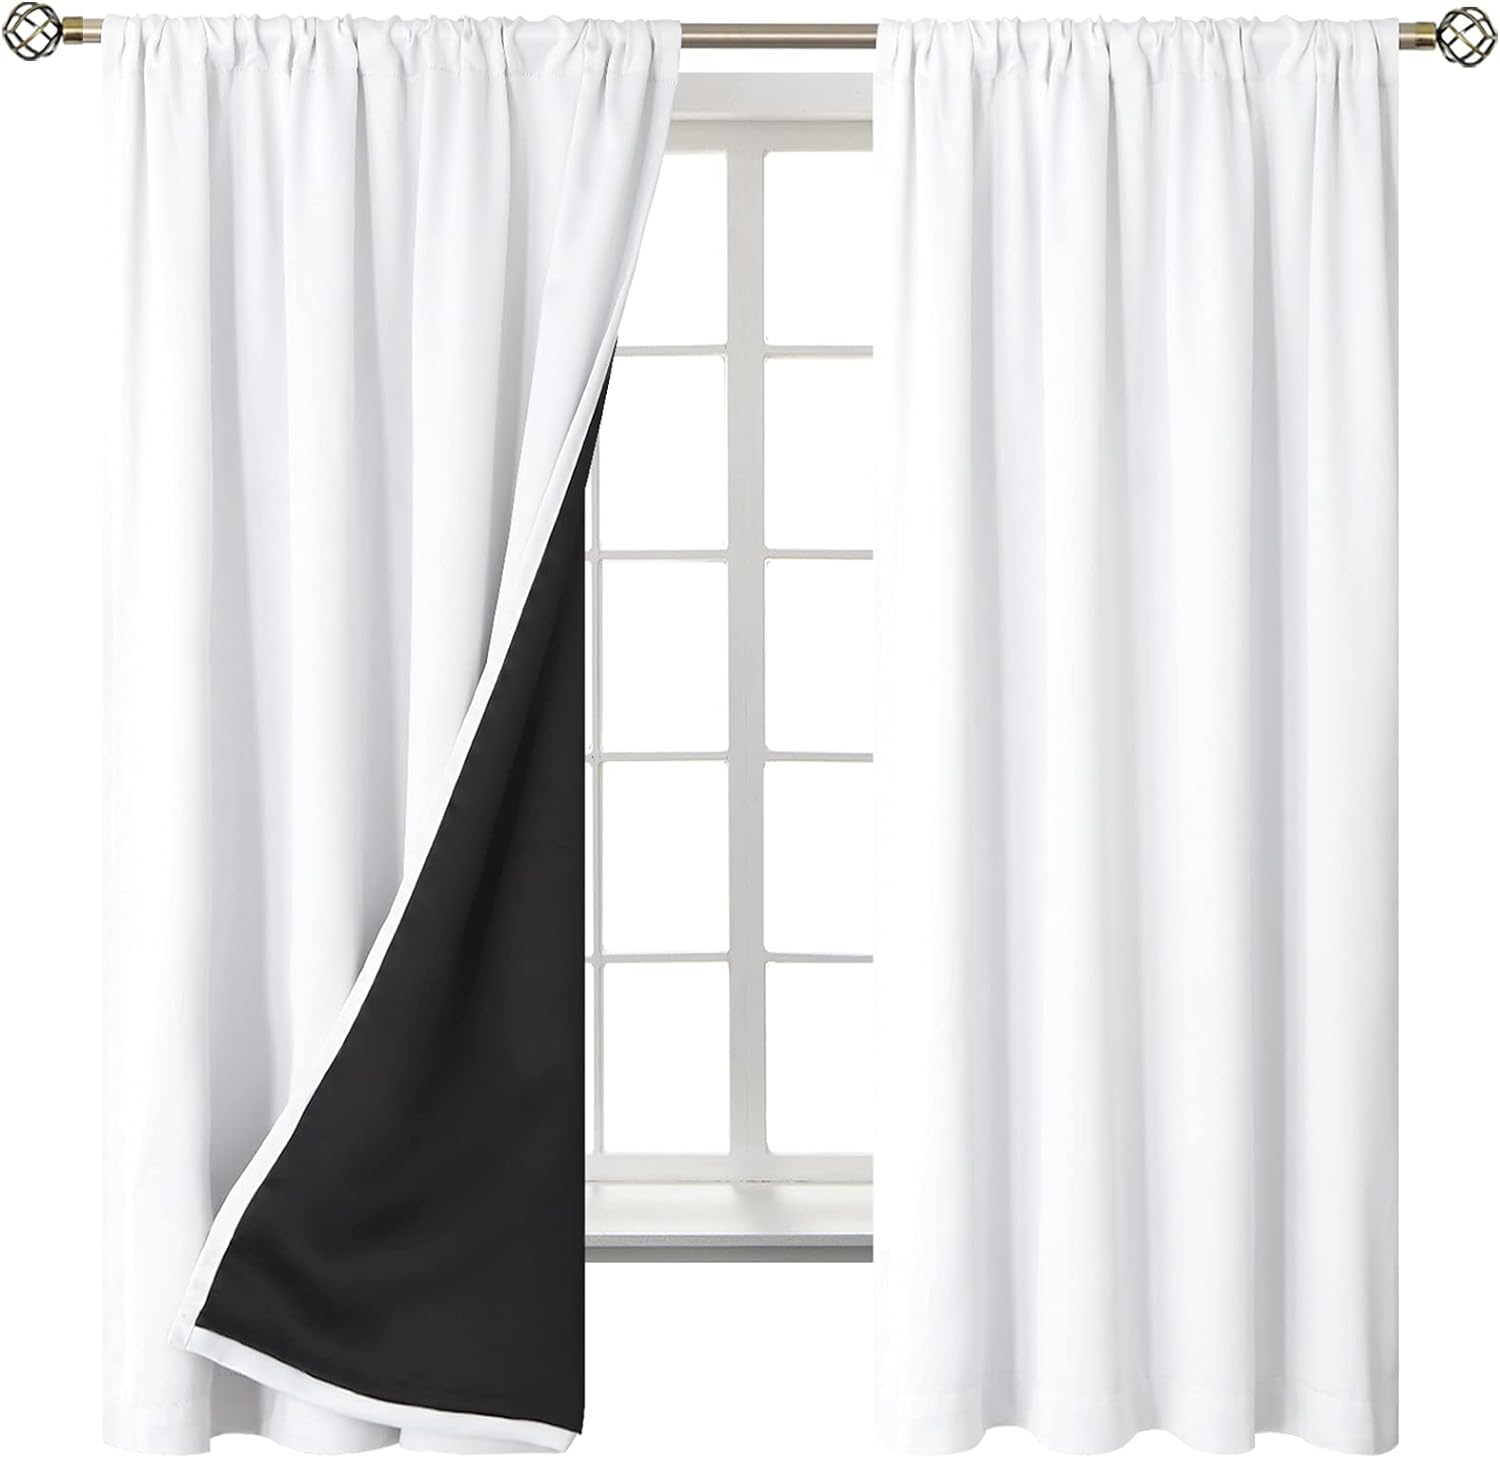 BGment Thermal Insulated 100% Blackout Curtains for Bedroom with Black Liner 42 x 45 Inch, Navy Blue, 2 Panels Double Layer Full Room Darkening Noise Reducing Grommet Curtain